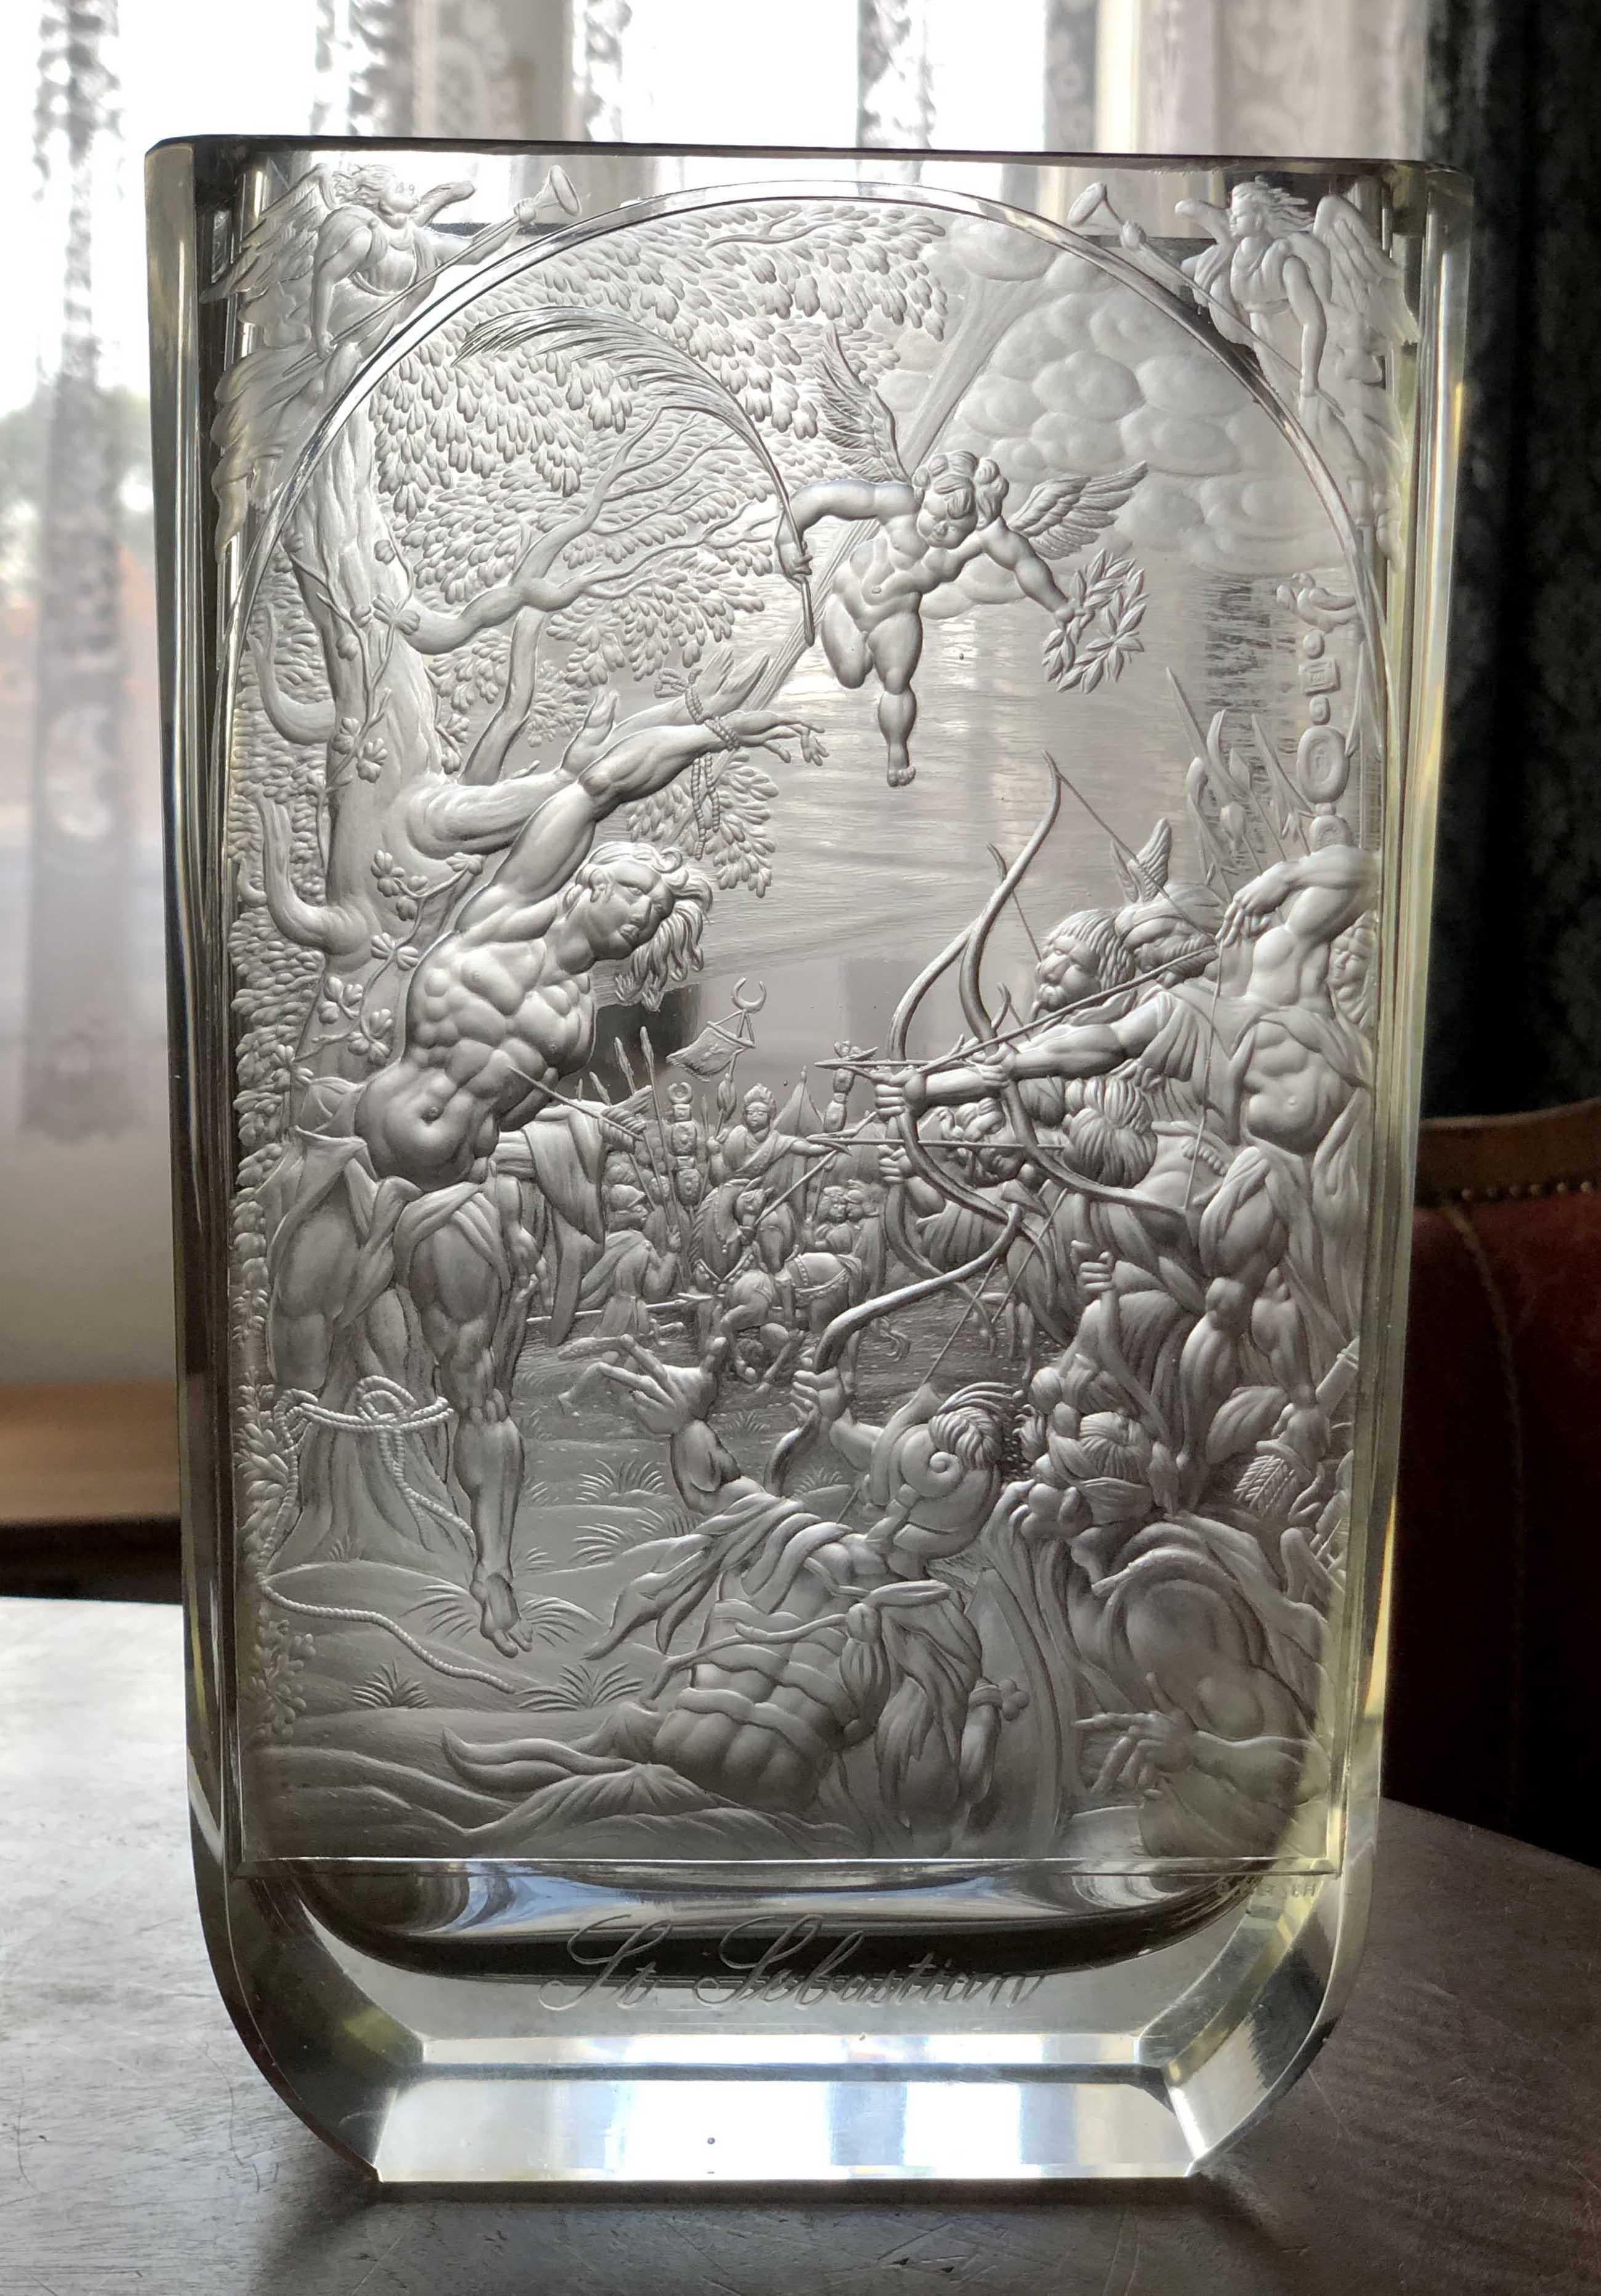 A unique engraved vase from the first half of the 20th century . This breathtaking figural engraving depicting the execution of Saint Sebastian – ( According to legend, Sebastian, the captain of the Praetorian Guard at the imperial court, openly